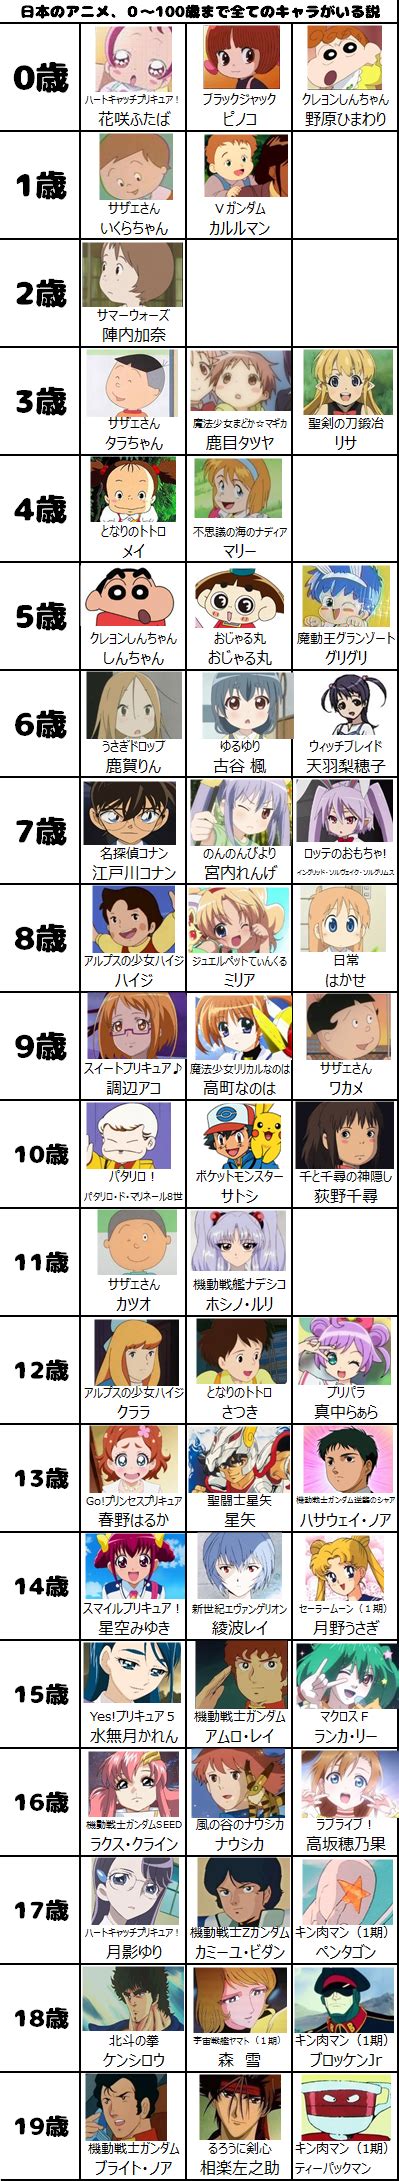 Crunchyroll Blog Charts Anime Characters Aged 0 To 100